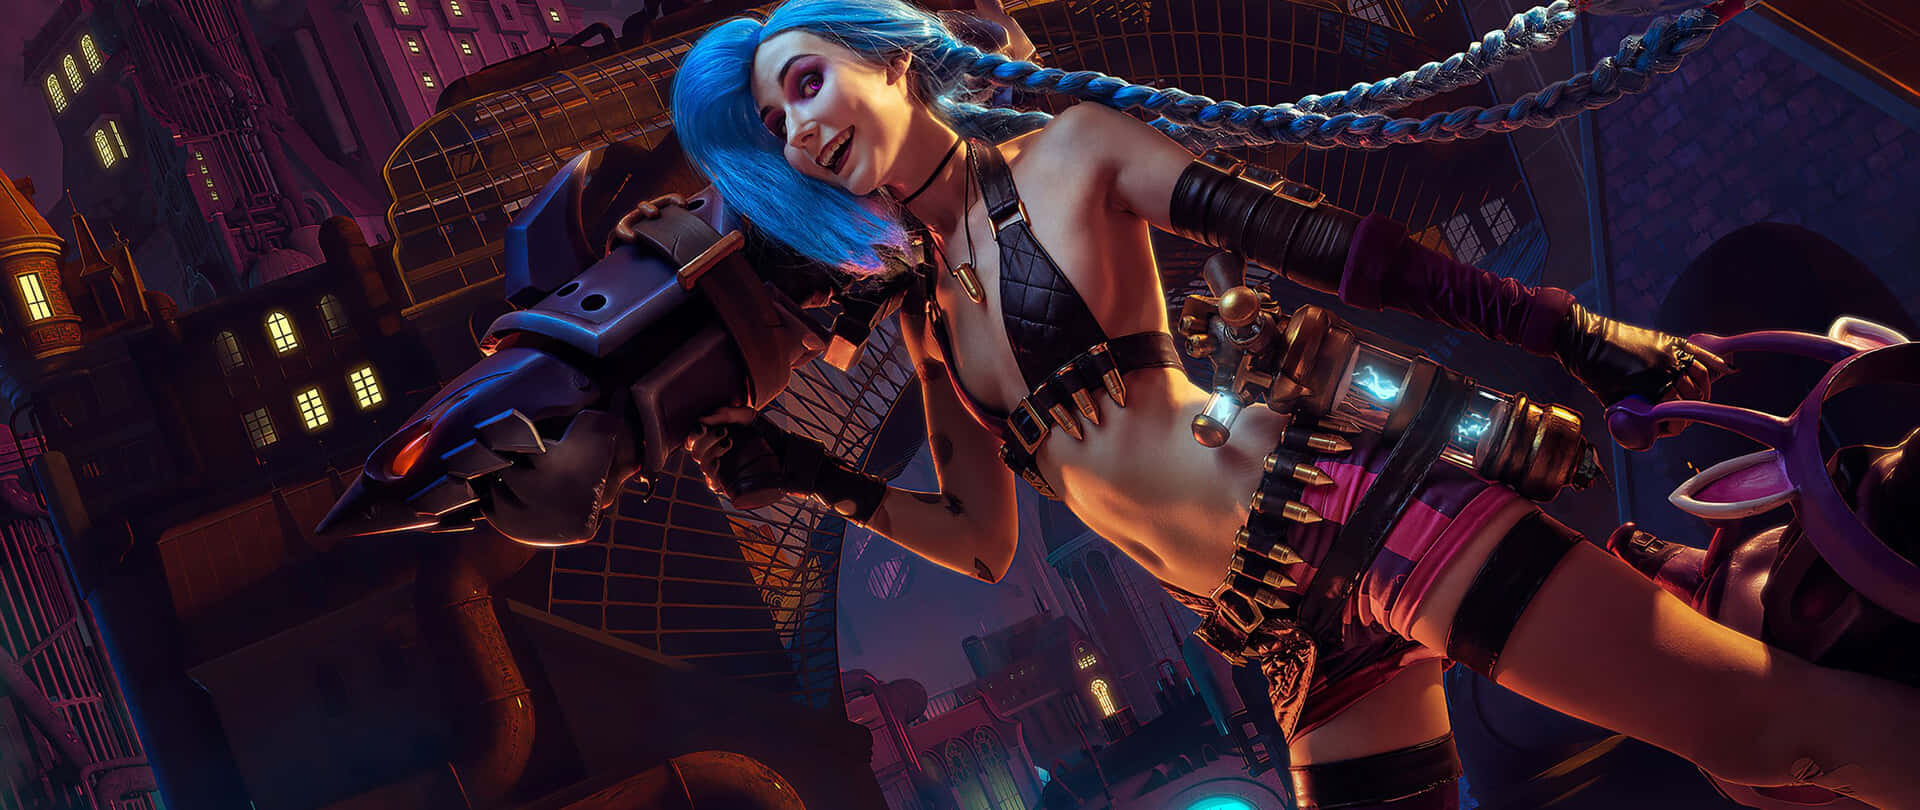 Jinx With Her Weapons in League of Legends